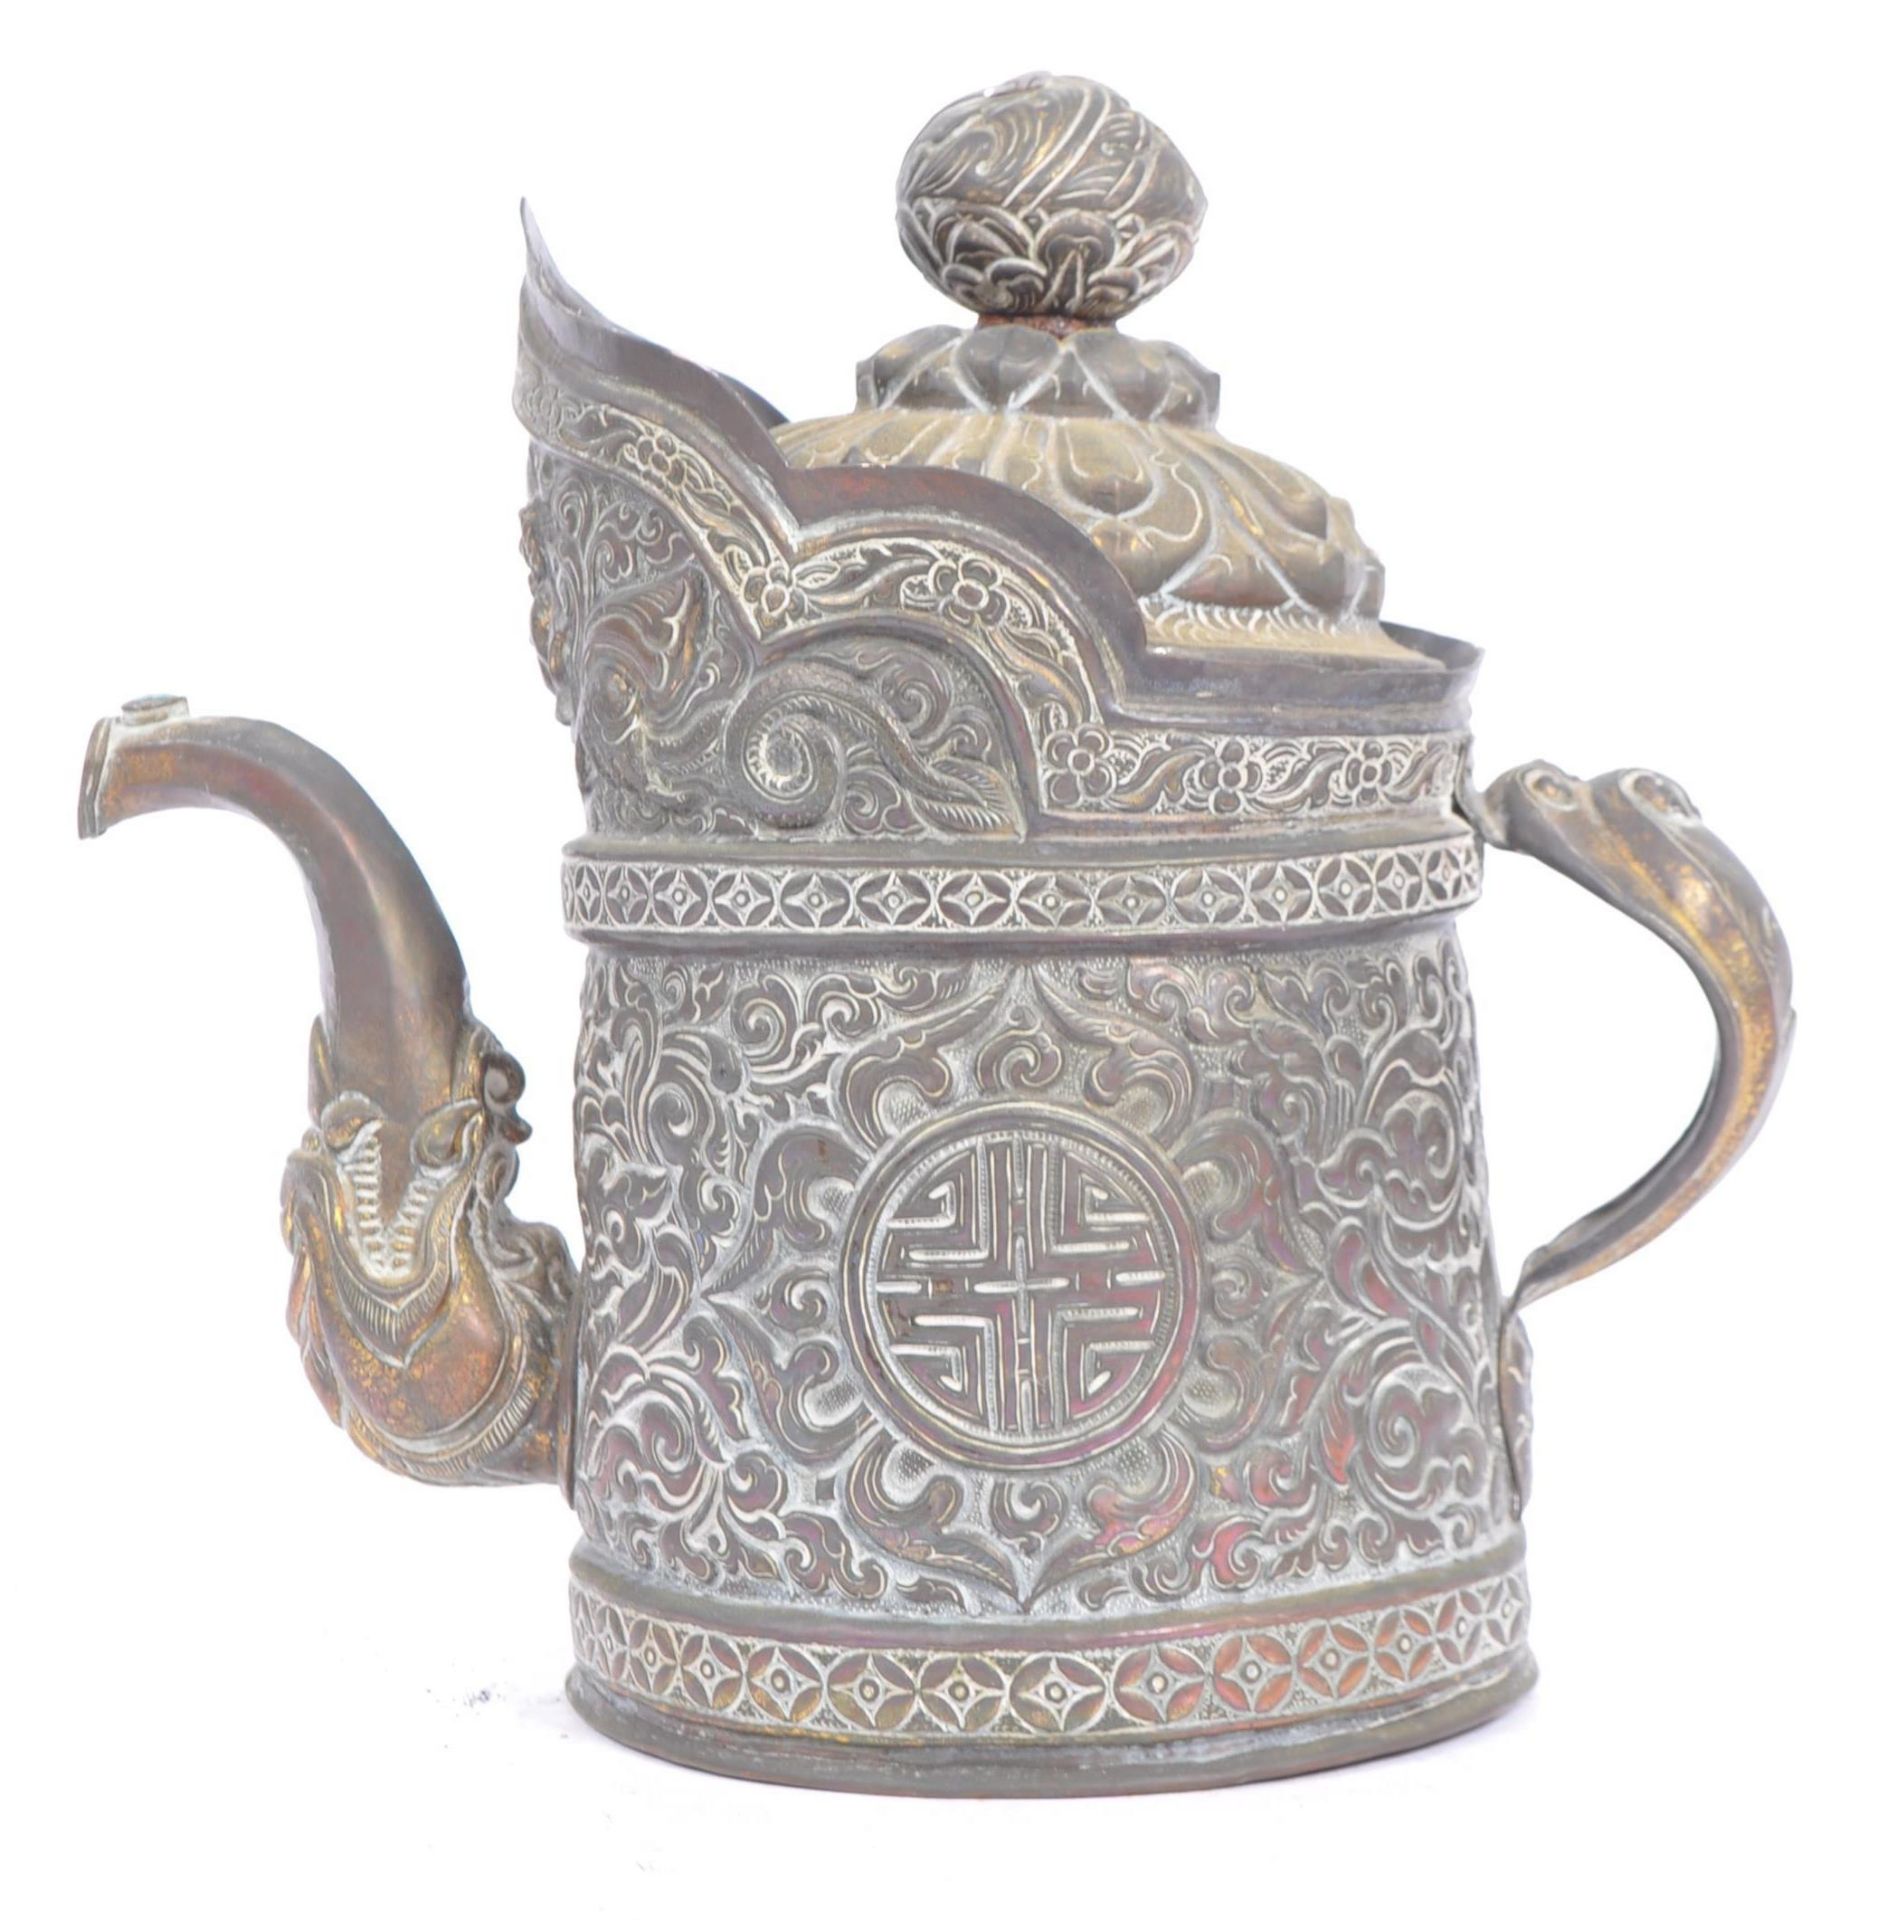 LARGE 19TH CENTURY CHINESE ORIENTAL TEAPOT - Image 3 of 7